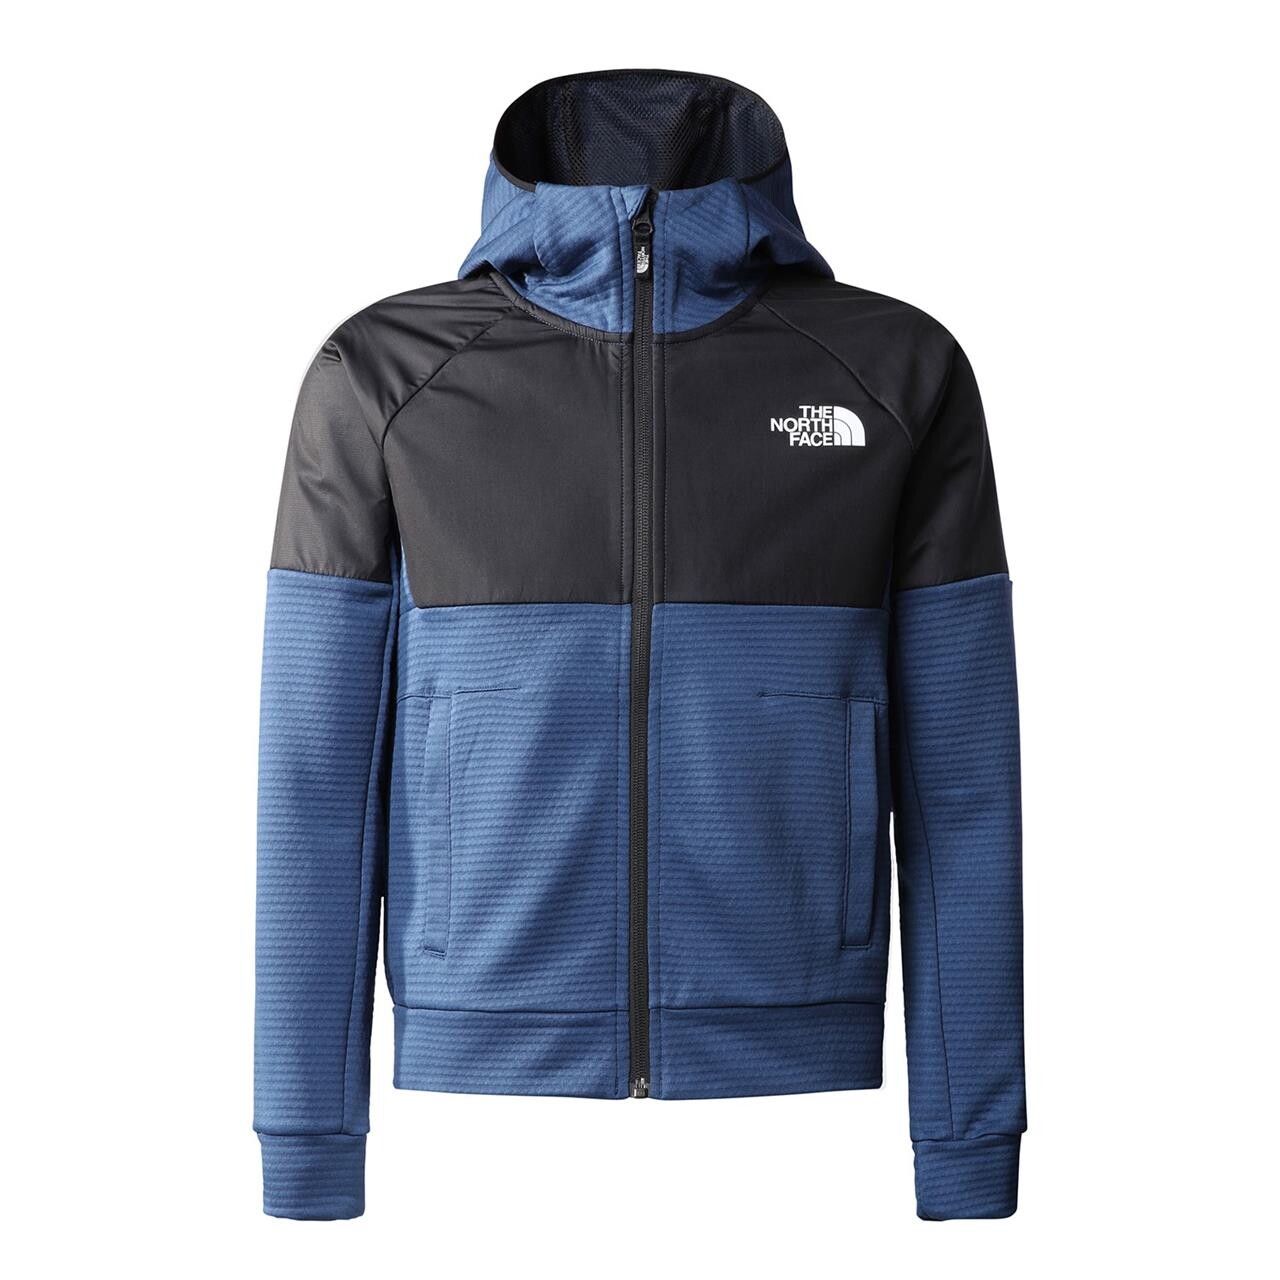 Billede af The North Face Youths Mountain Athletics Full Zip Hoodie (Blå (SHADY BLUE) Medium)